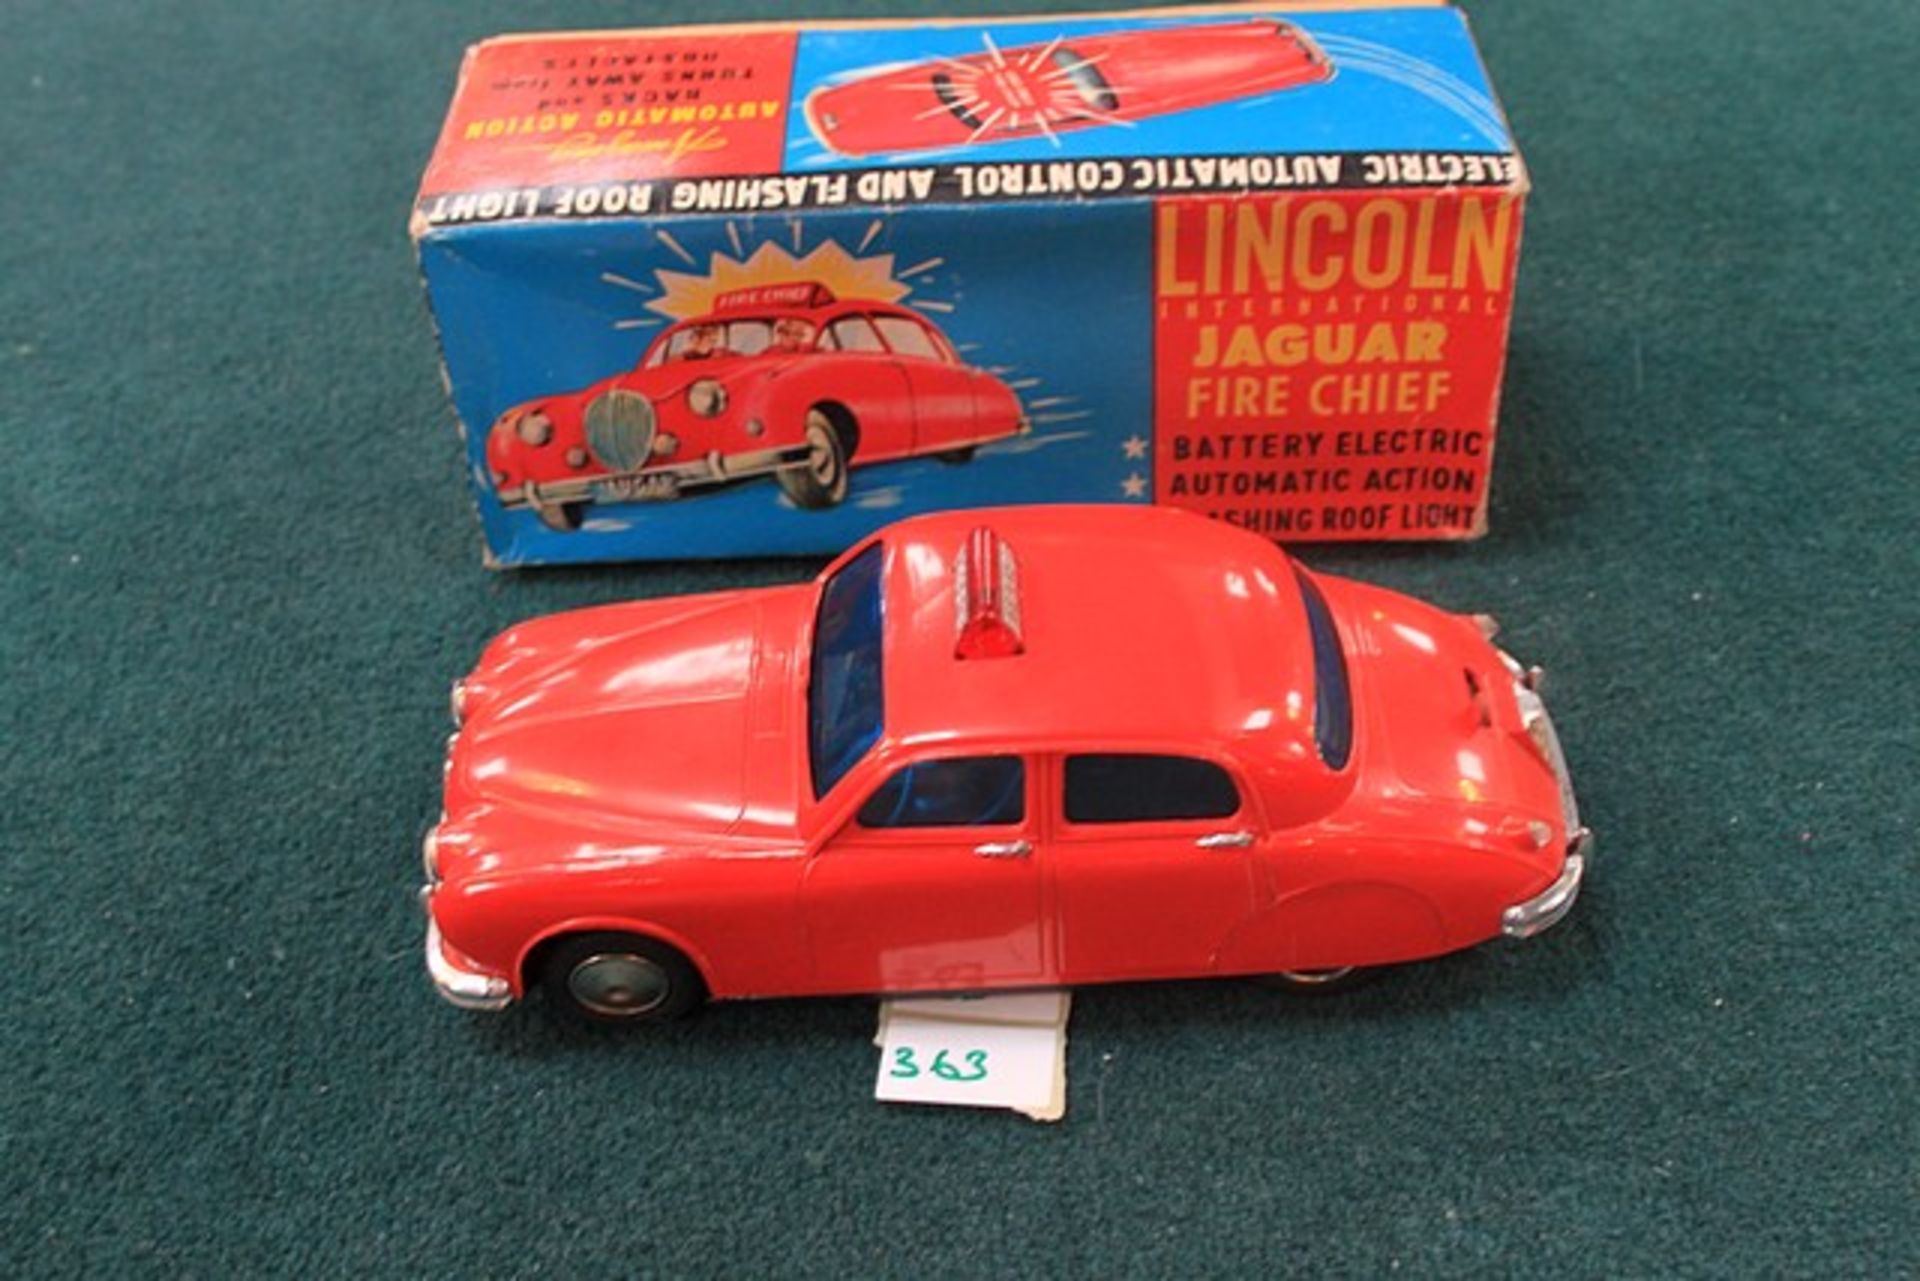 LINCOLN INTERNATIONAL 1960s BATTERY OPERATED JAGUAR FIRE CHIEF CAR IN THE ORIGINAL BOX 8 1/2" L